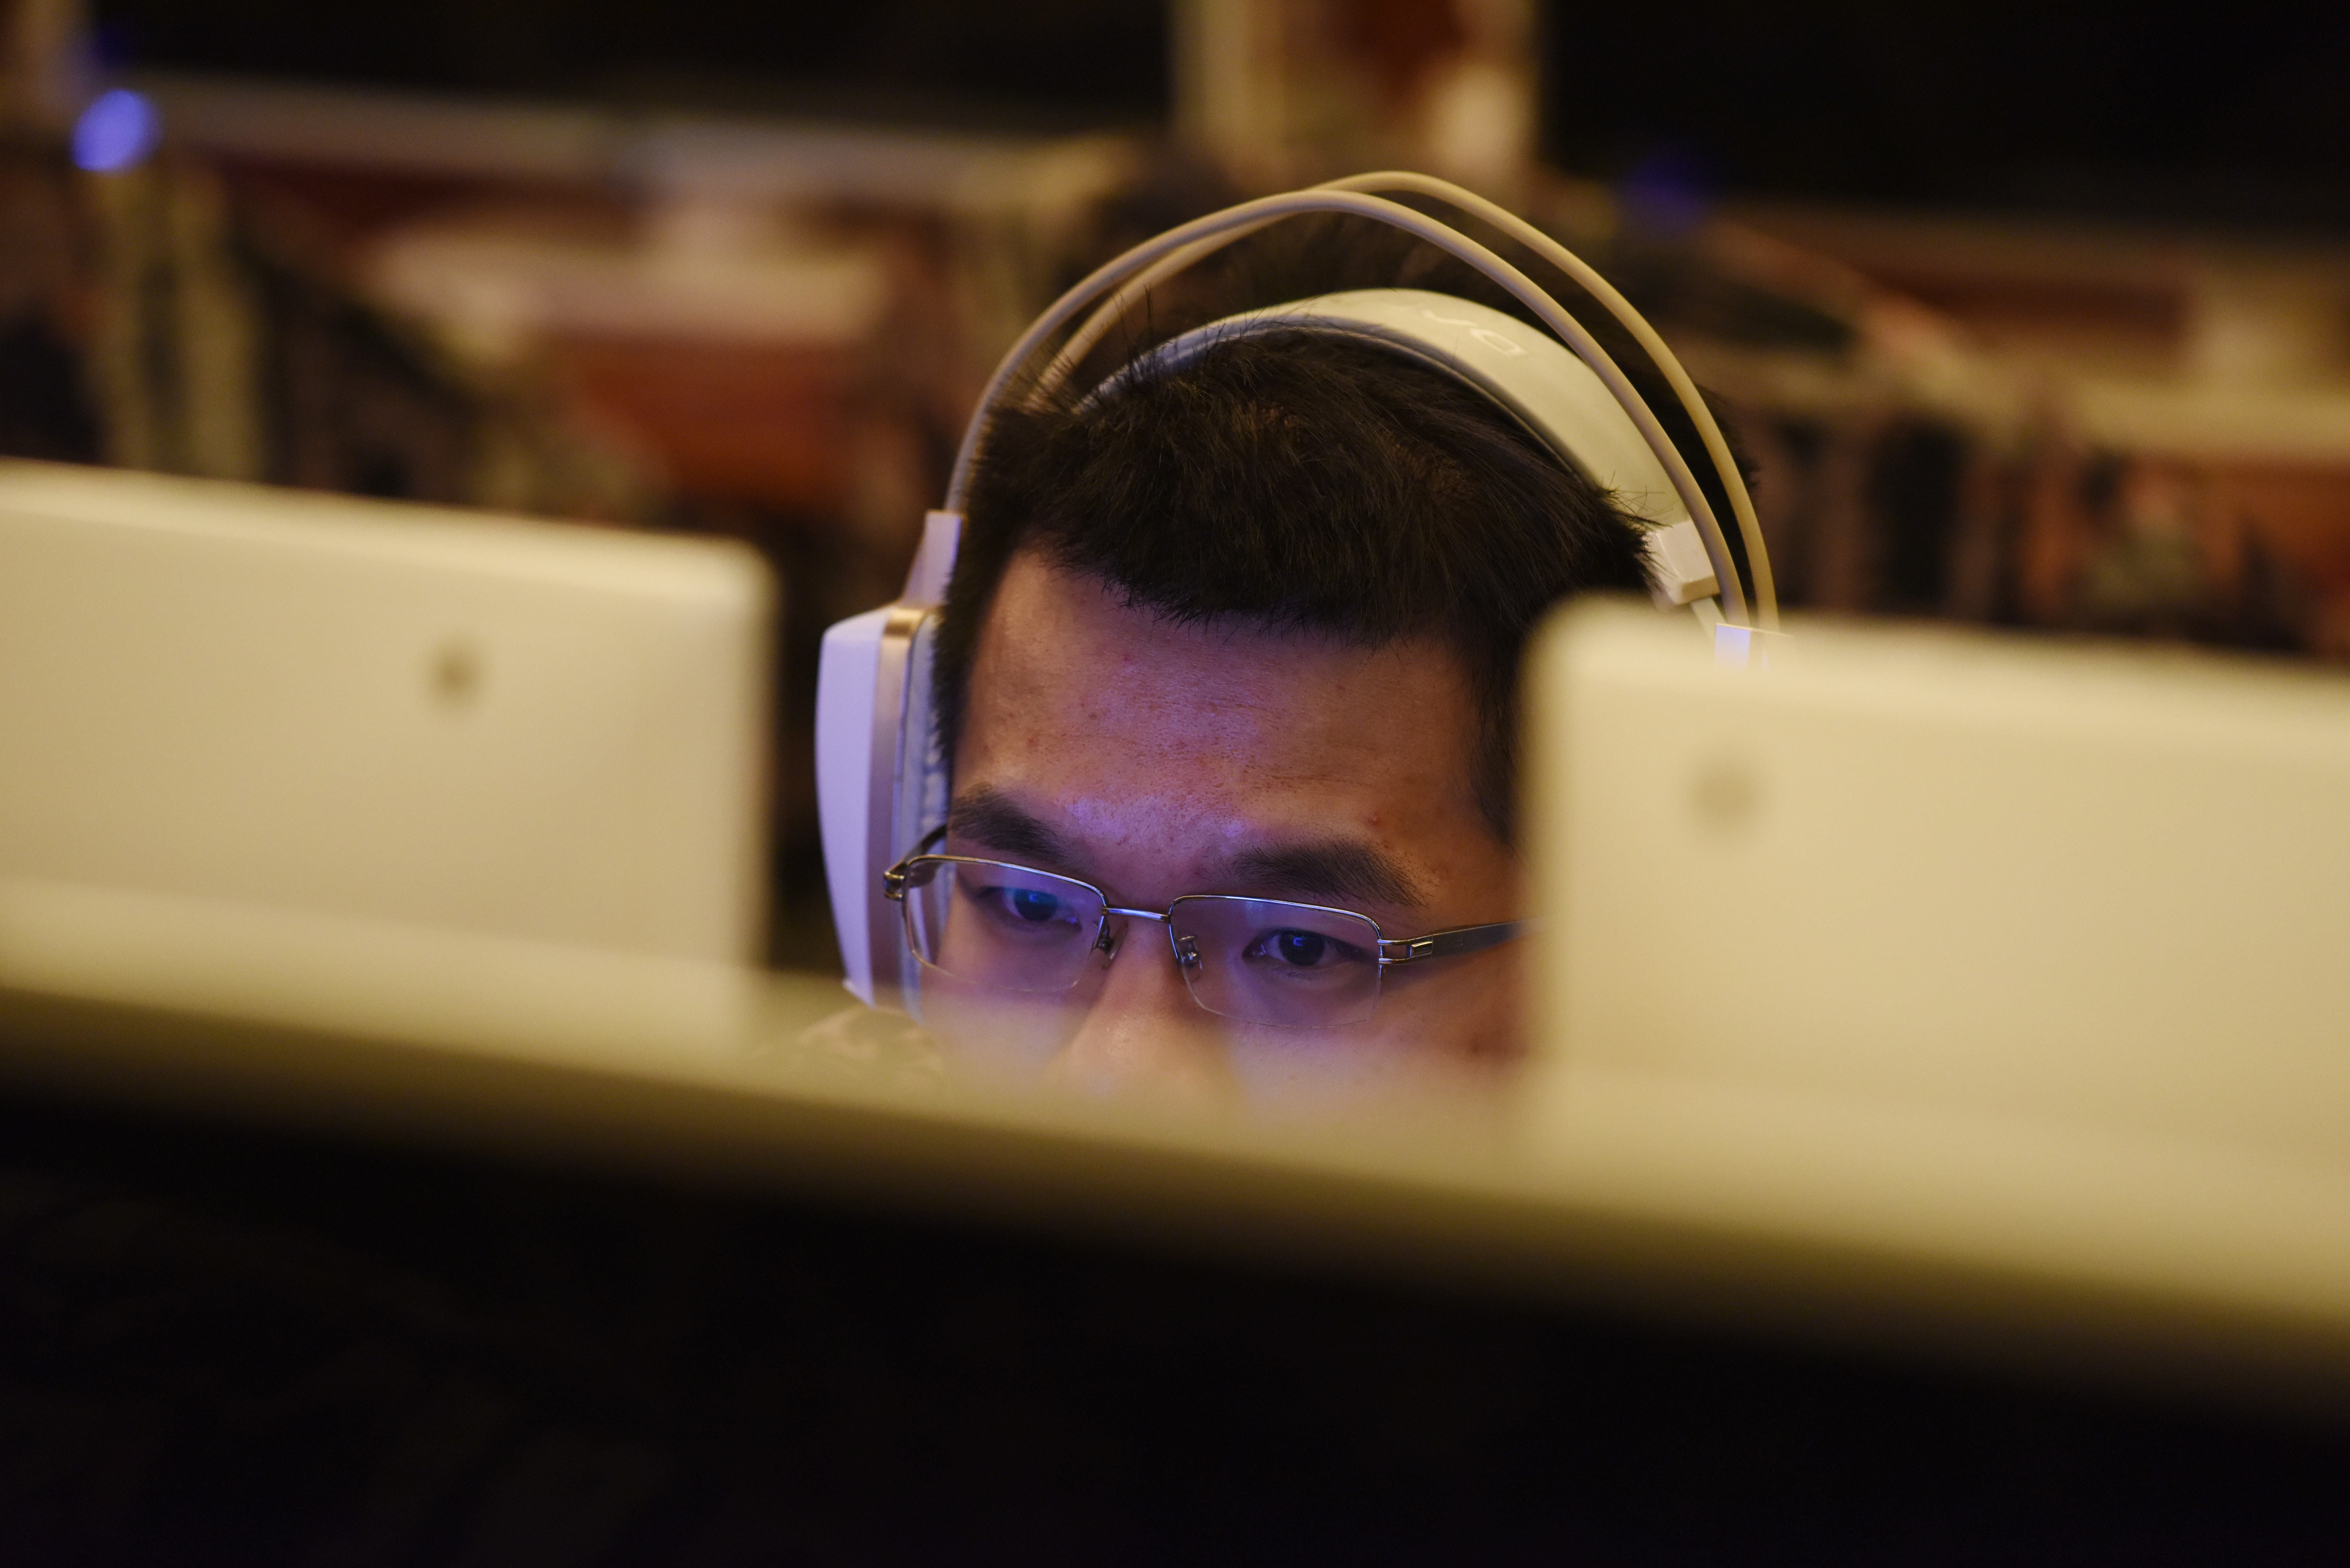 Software engineers and programmers said they were not able to fully concentrate for 12 hours. Photo: AFP